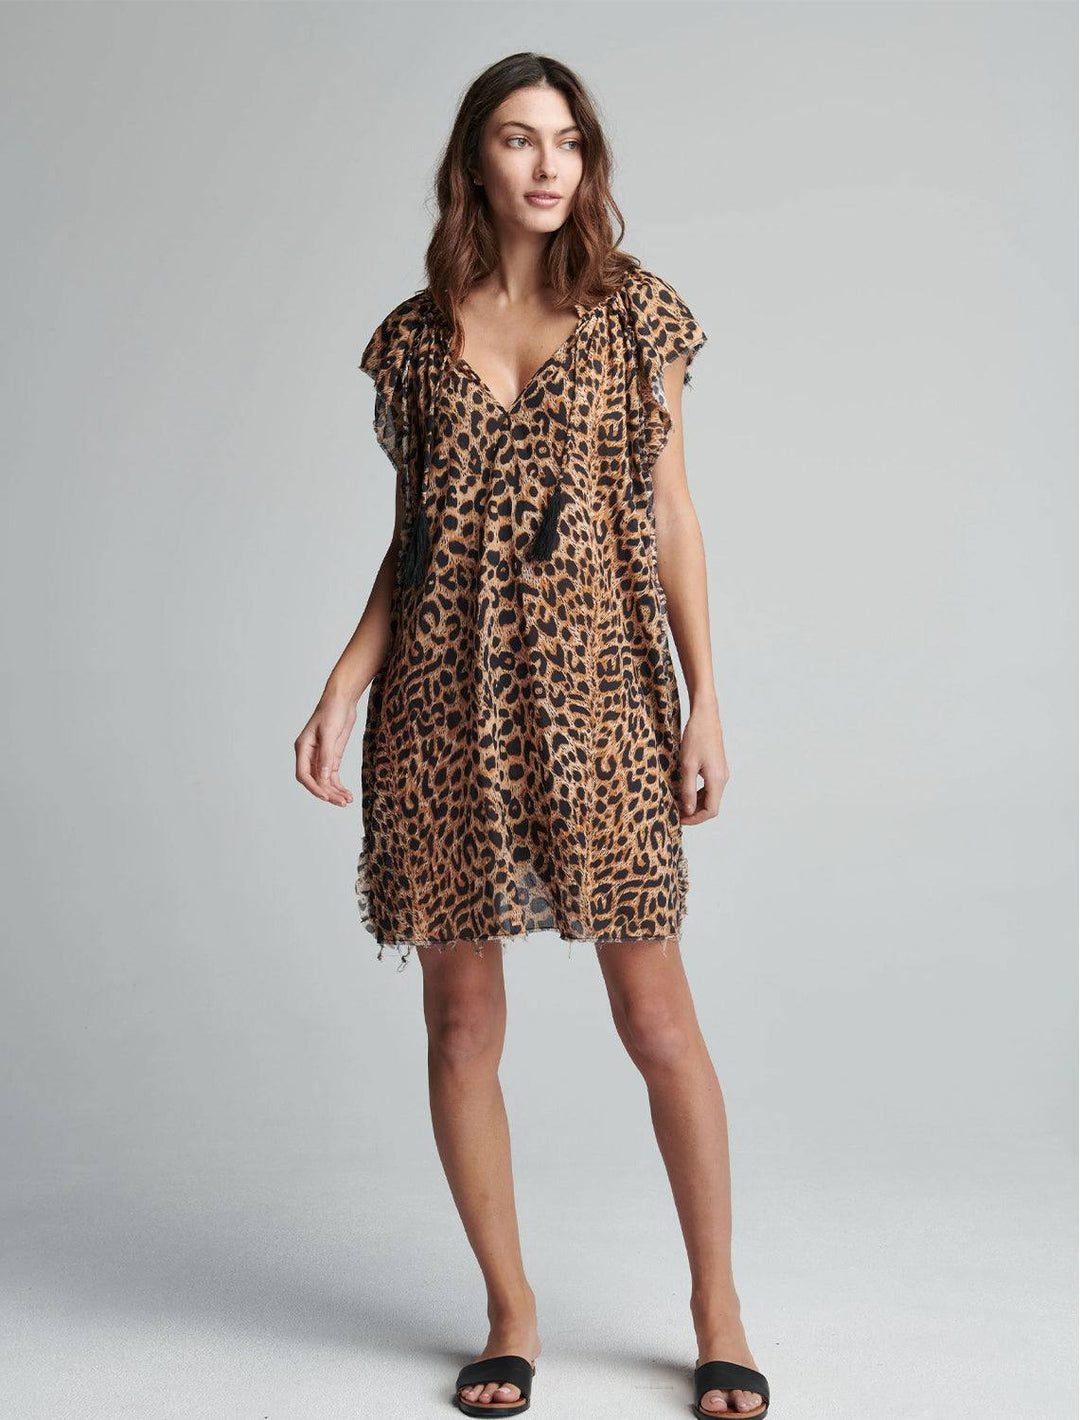 model wearing copley dress in cheetah with black sandals